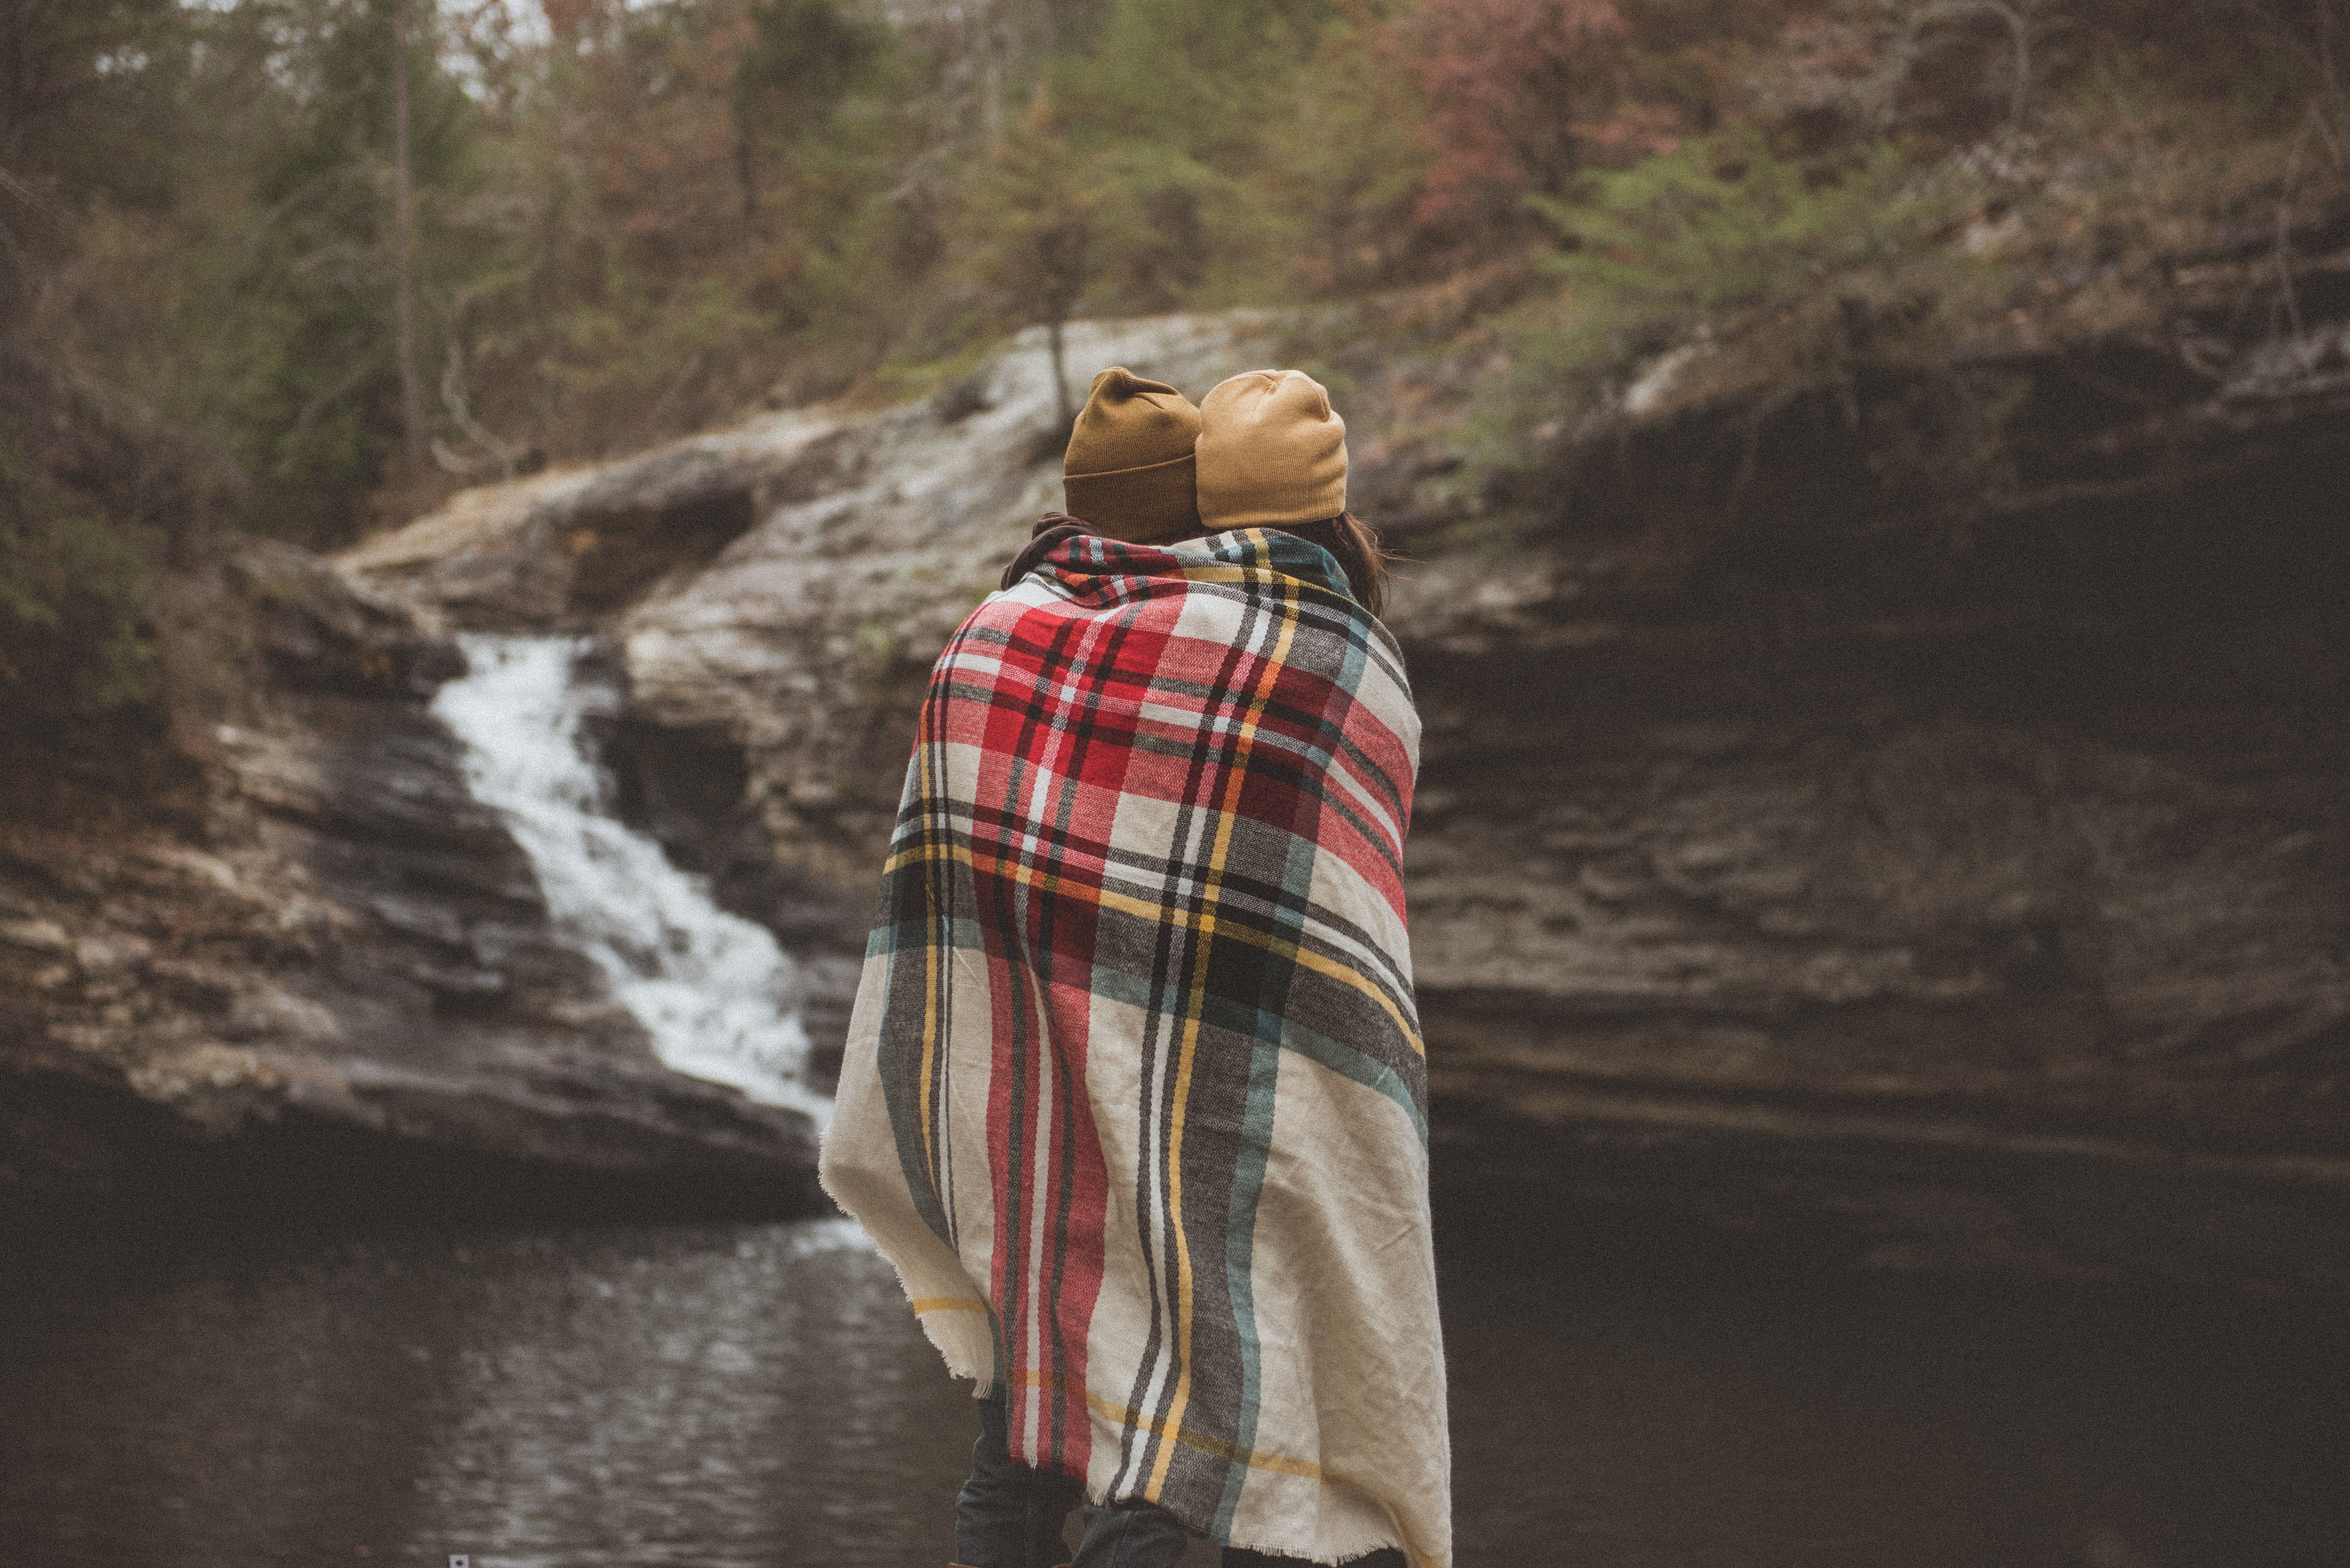 A couple with a blanket wrapped around them in front of a body of water. | Source: Unsplash